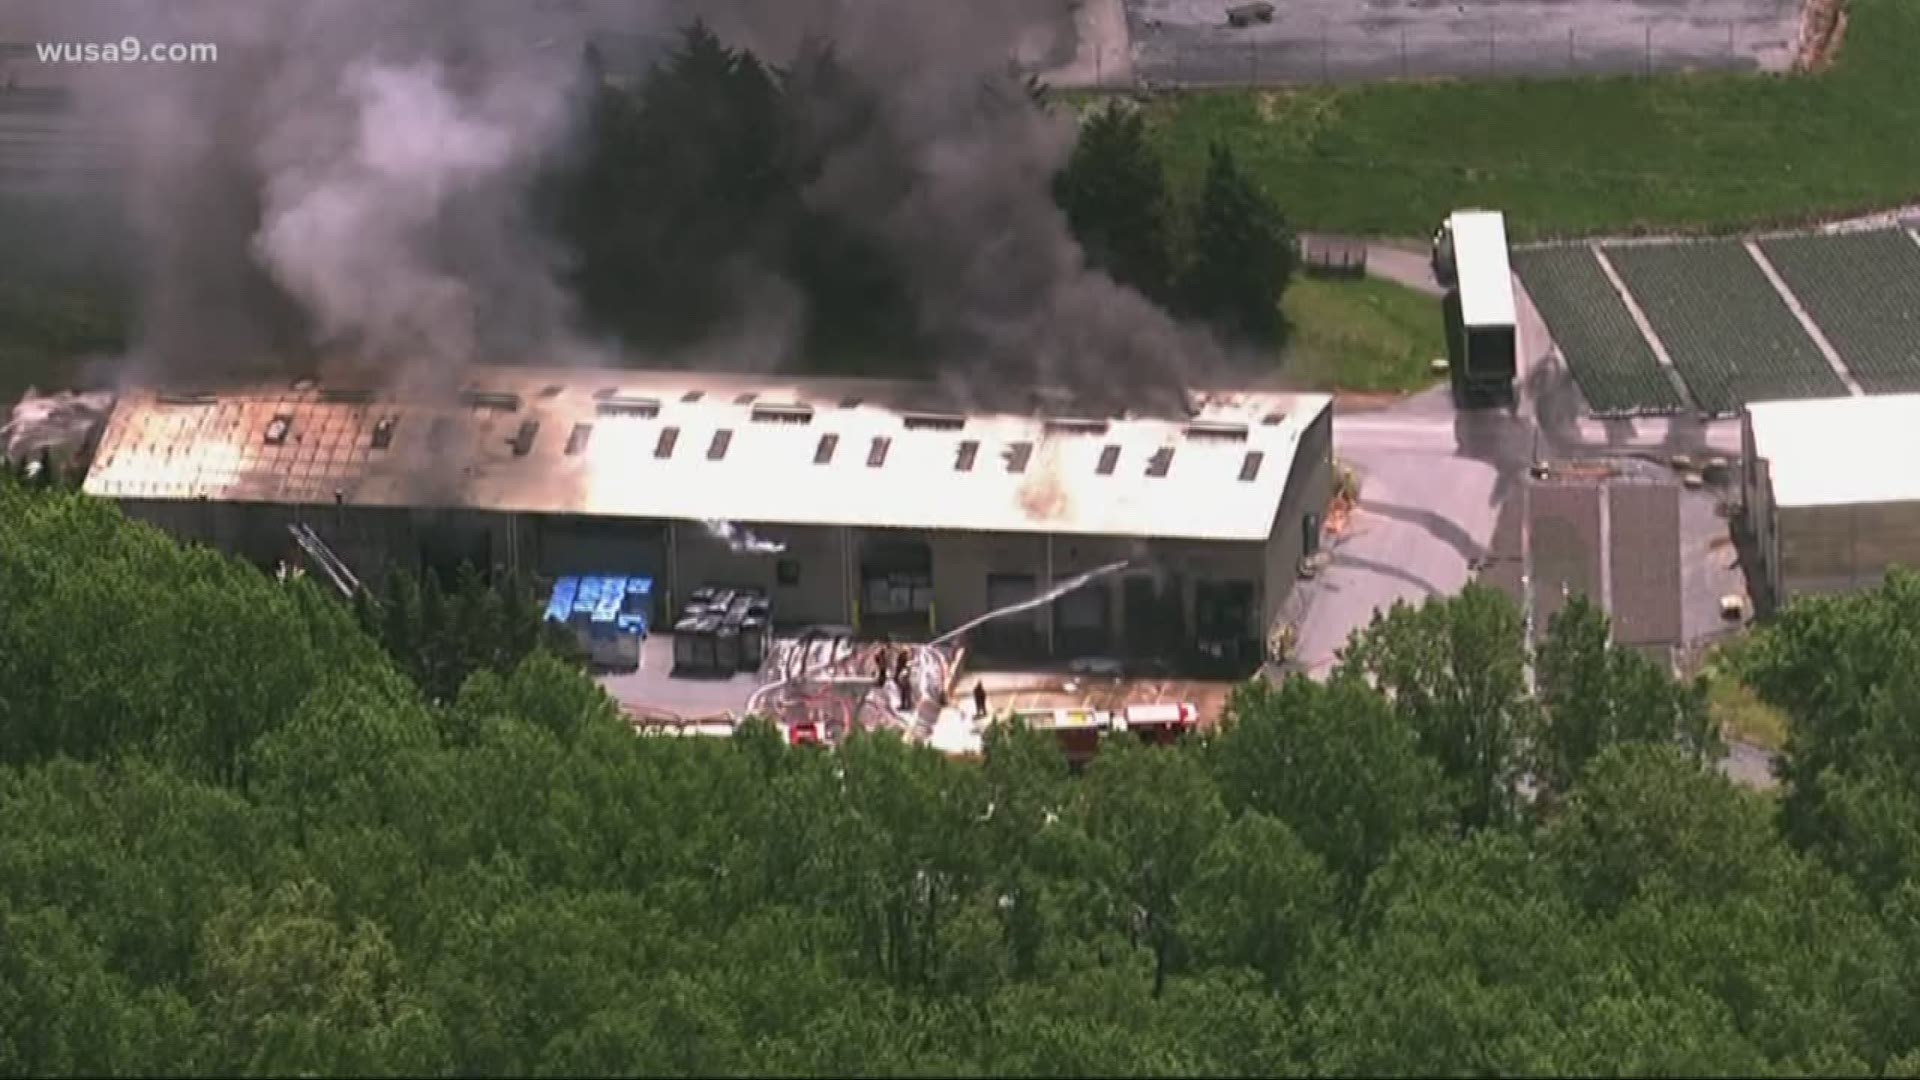 A nursery went up in flames today in Montgomery County. Sky9 was over the fire shortly after it broke out early this afternoon at Bell Nursery on Bell Road in Burtonsville. Firefighters say fuel, fertilizer, feed, and equipment in the nursery warehouse made the flames hard to bring under control.